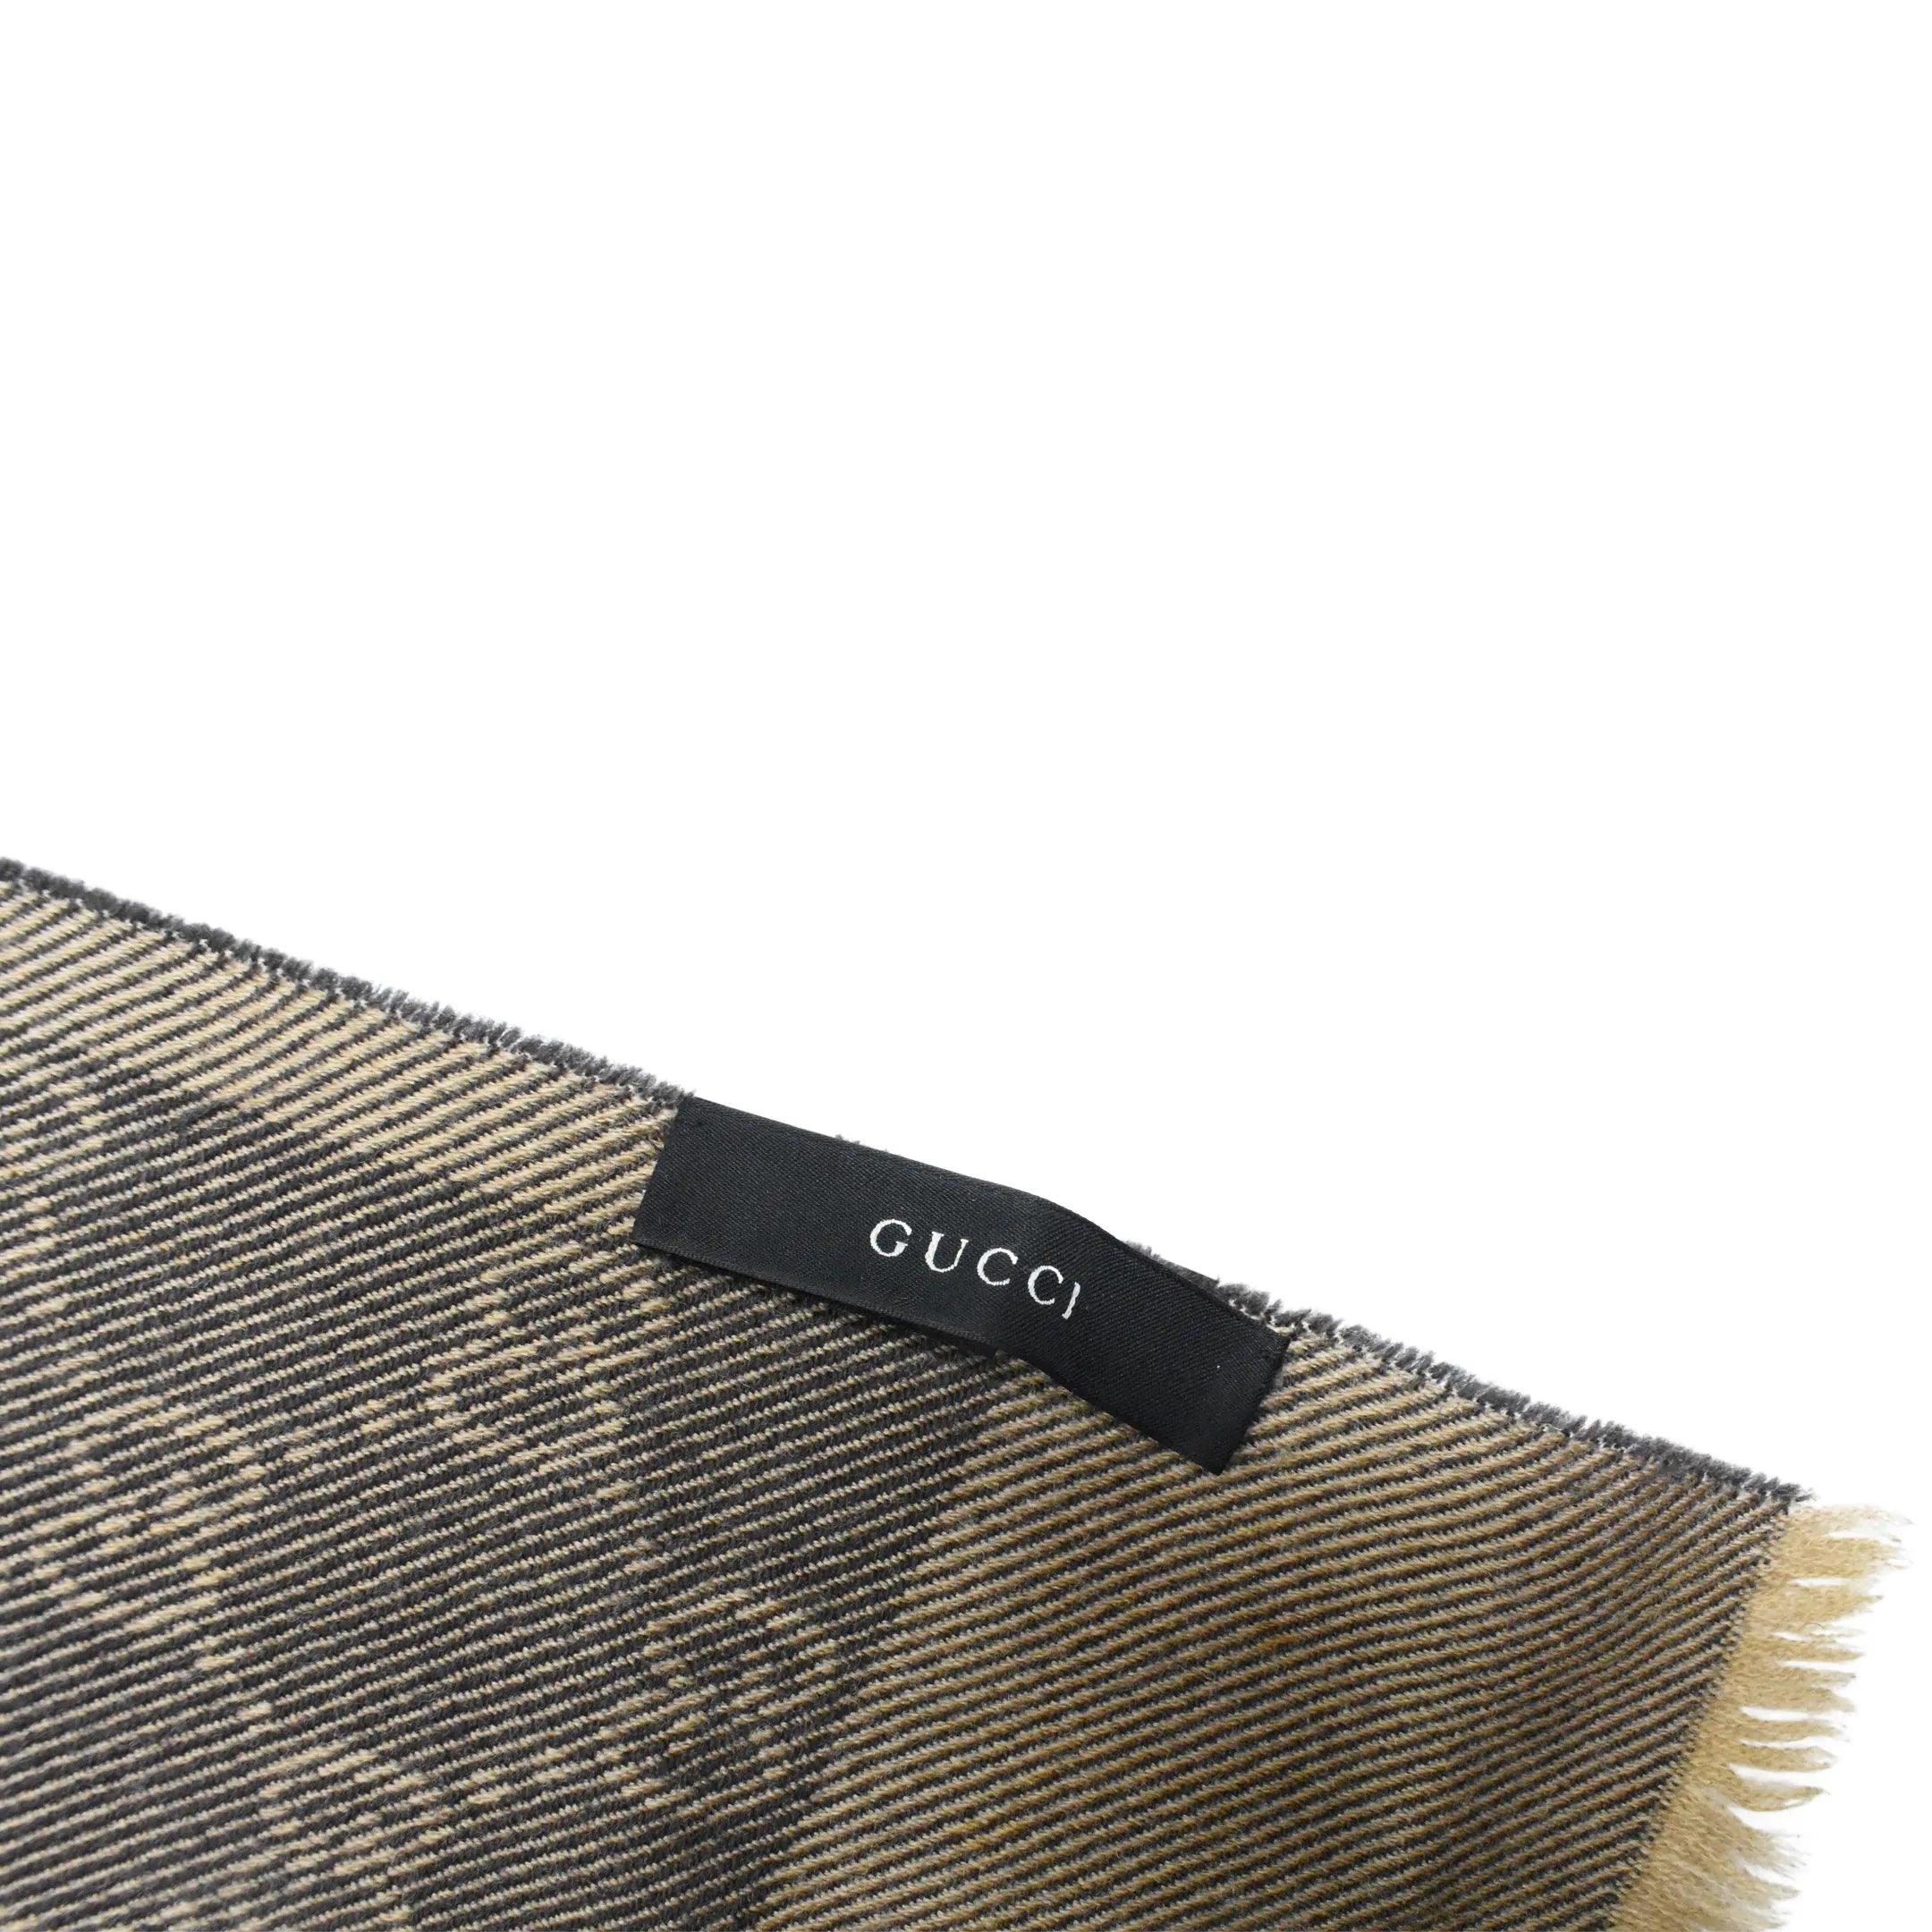 Gucci Scarf - Fashionably Yours